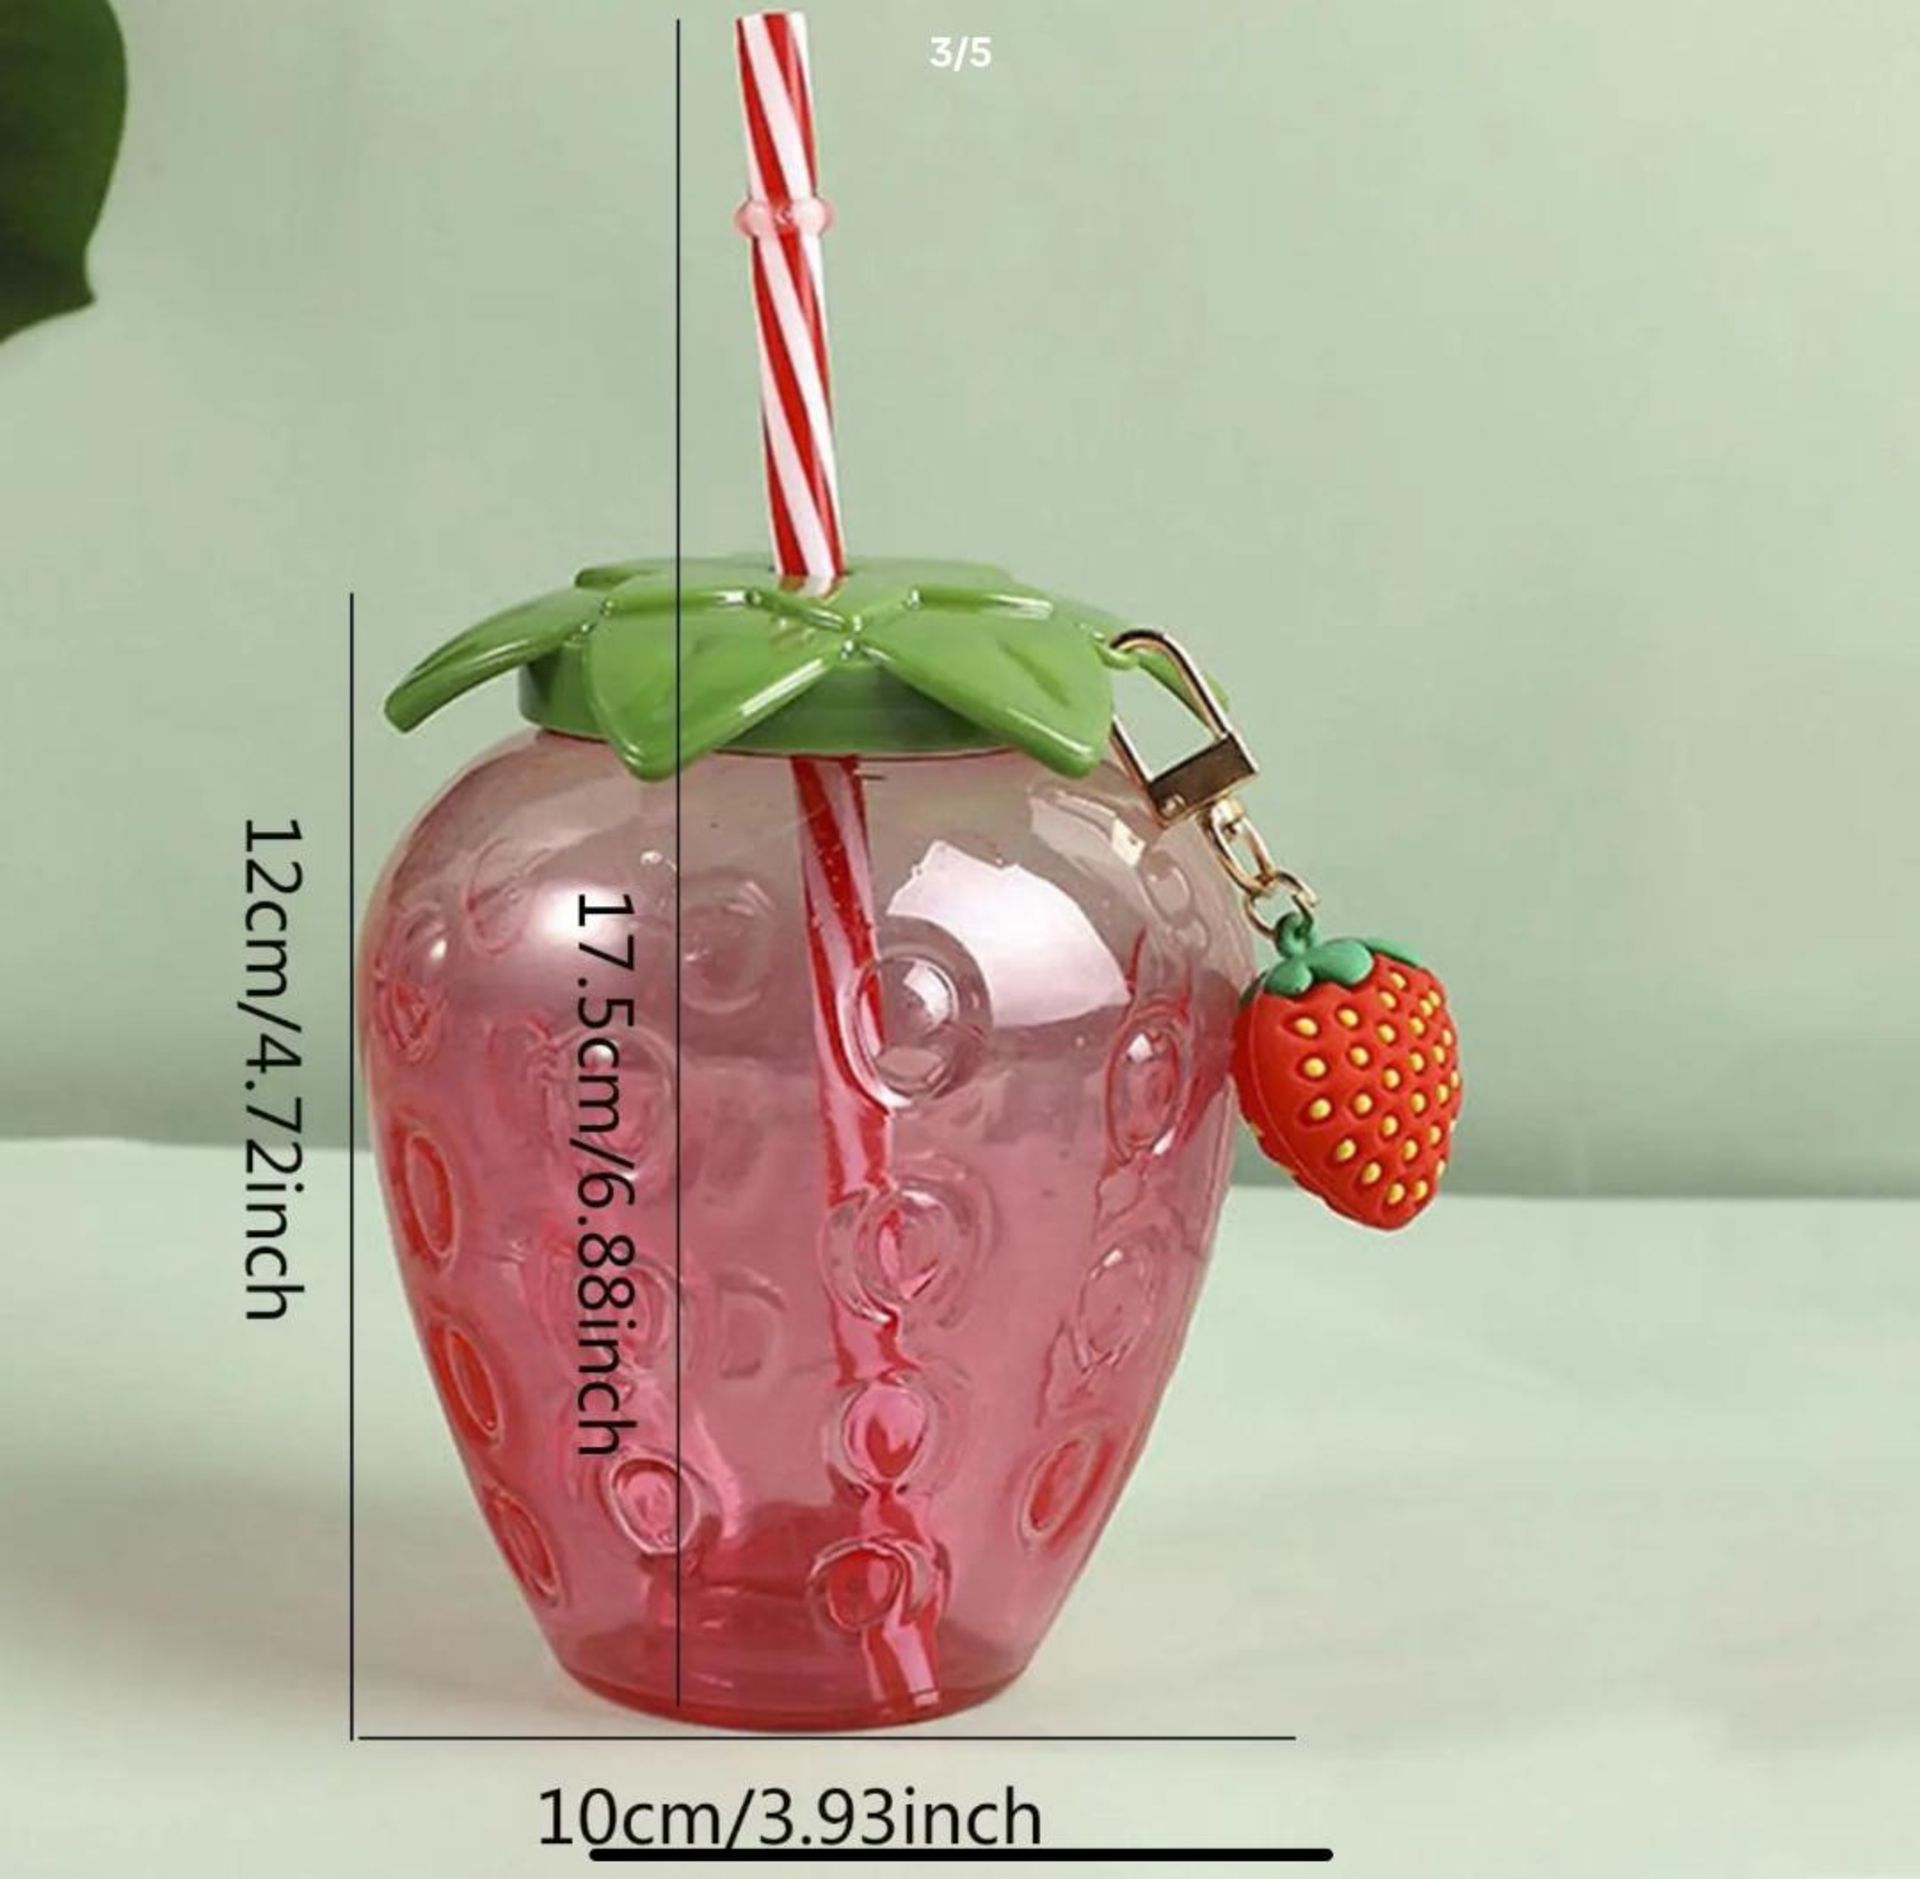 Strawberry Shaped Water Bottle With Straw - Image 2 of 2